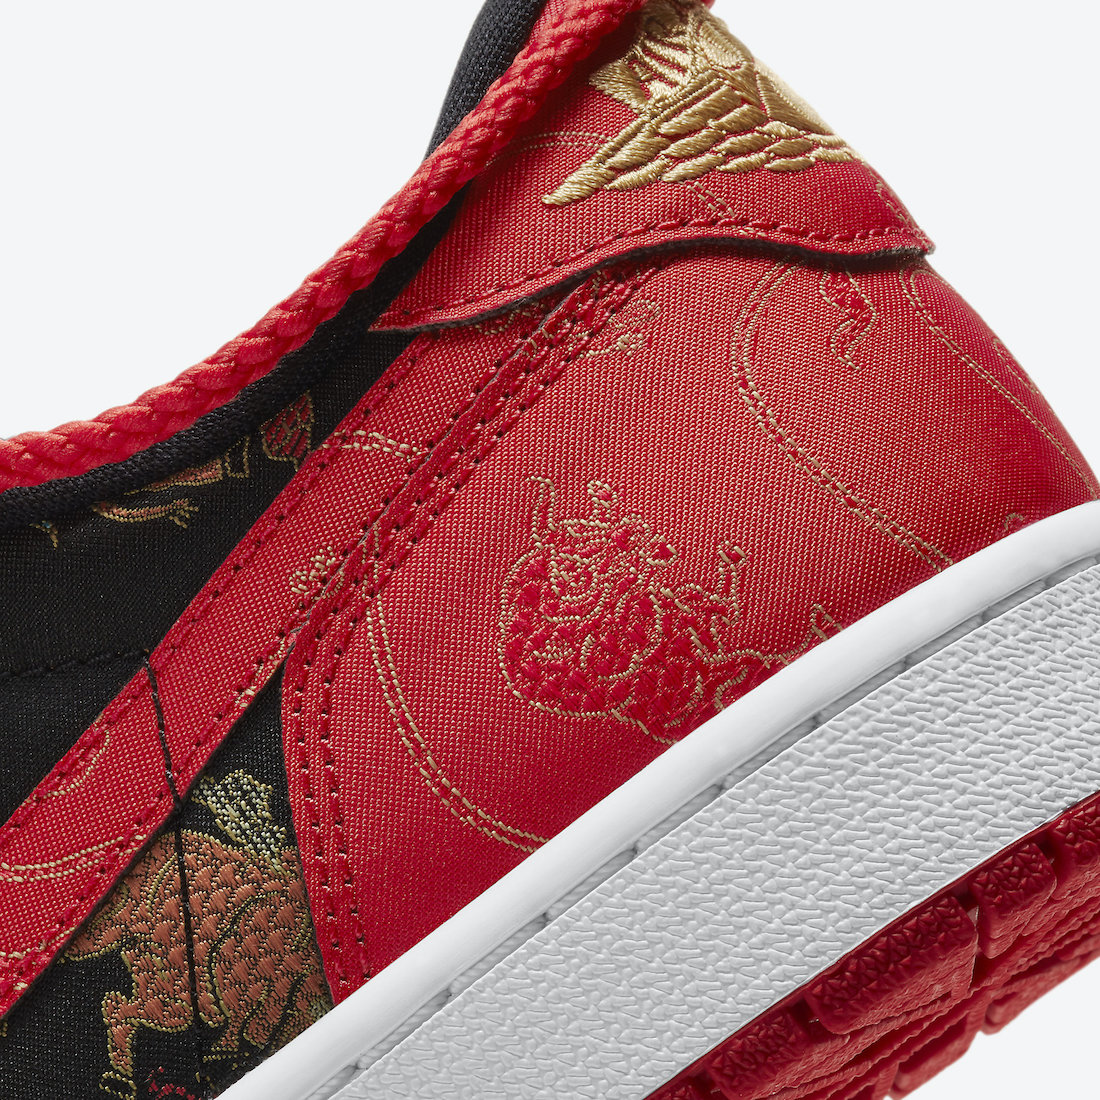 Air-Jordan-1-Low-CNY-Chinese-New-Year-DD2233-001-Release-Date-7